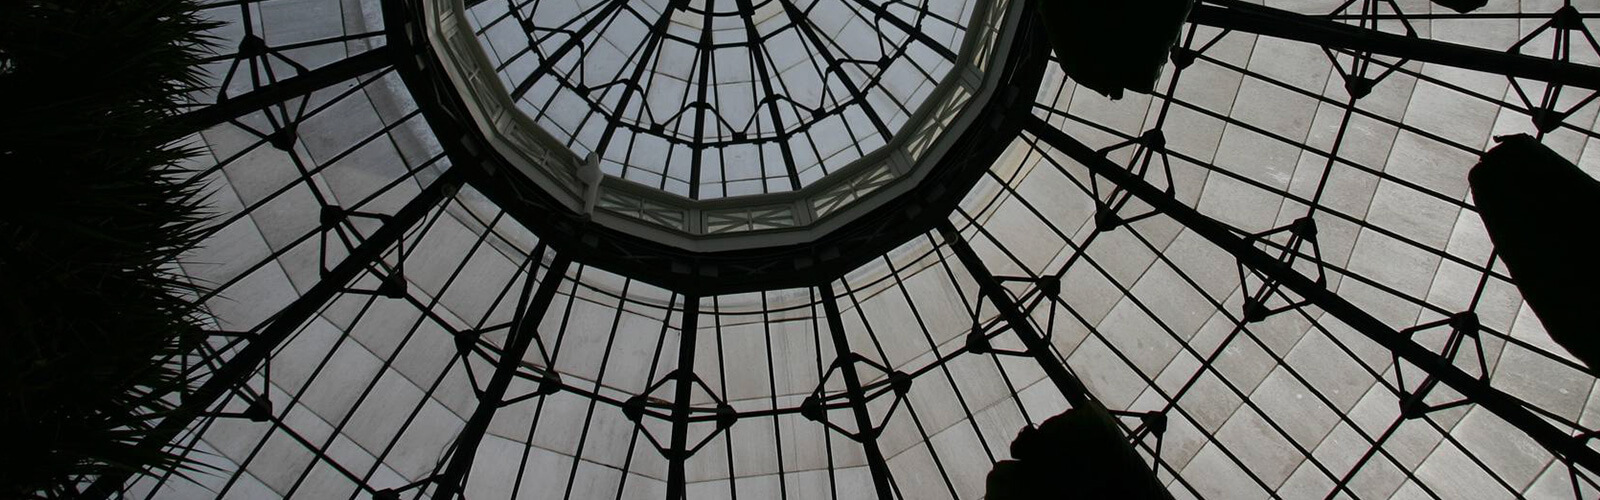 Looking up at the inside of the glass dome and cupola of Allan Gardens Conservatory. Plant leaves silhouetted on the left.